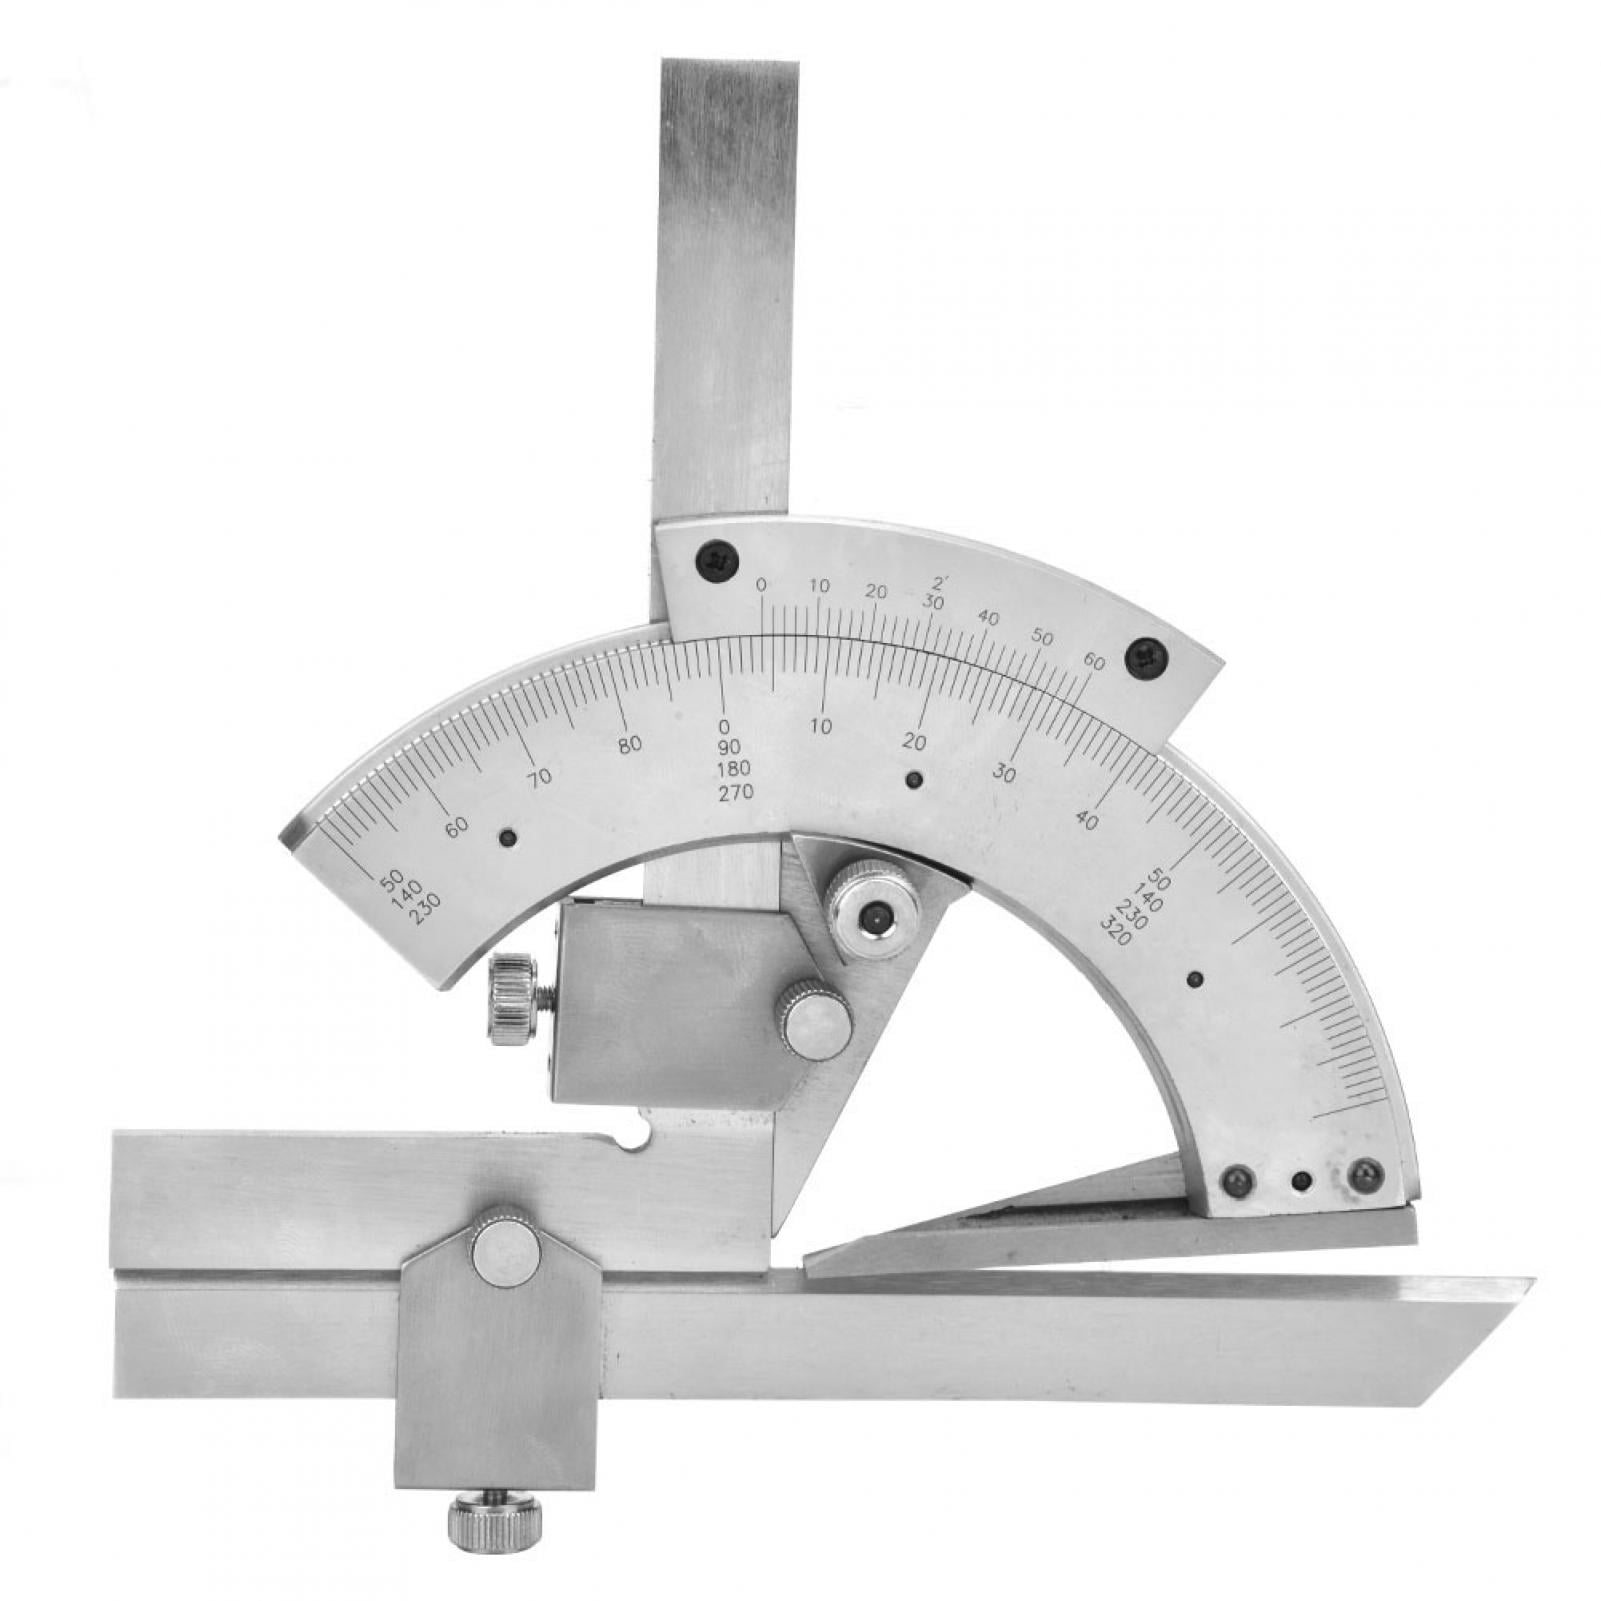 Angle Gauge High Accuracy Universal Durable Professional Practical for Woodworking Carpenter Bevel Protractor 